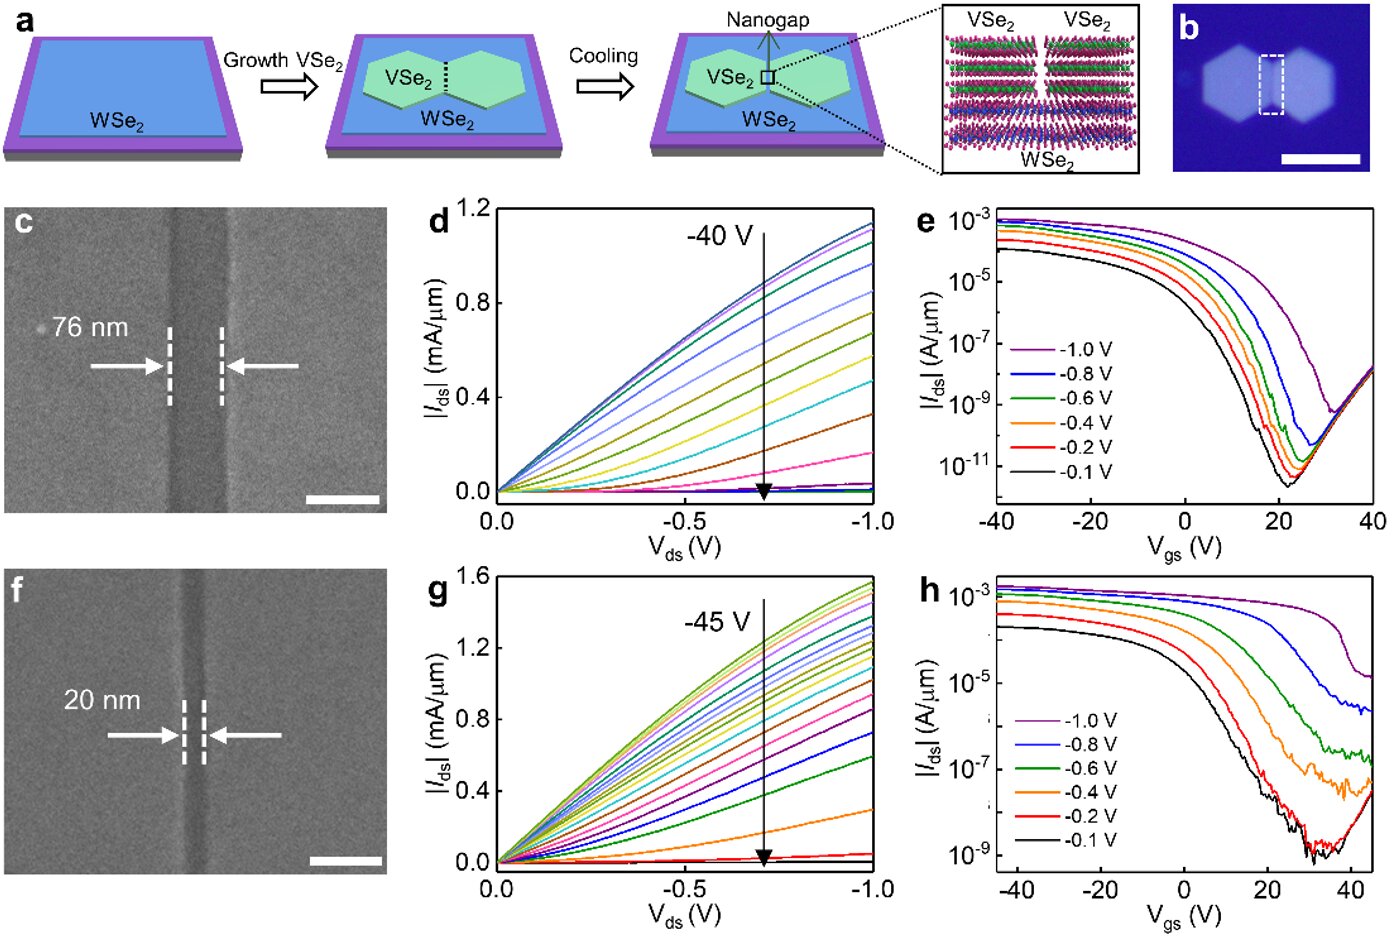 Bilayer tungsten diselenide transistors with ON-state current densities over 1.5 milliamperes per micrometer